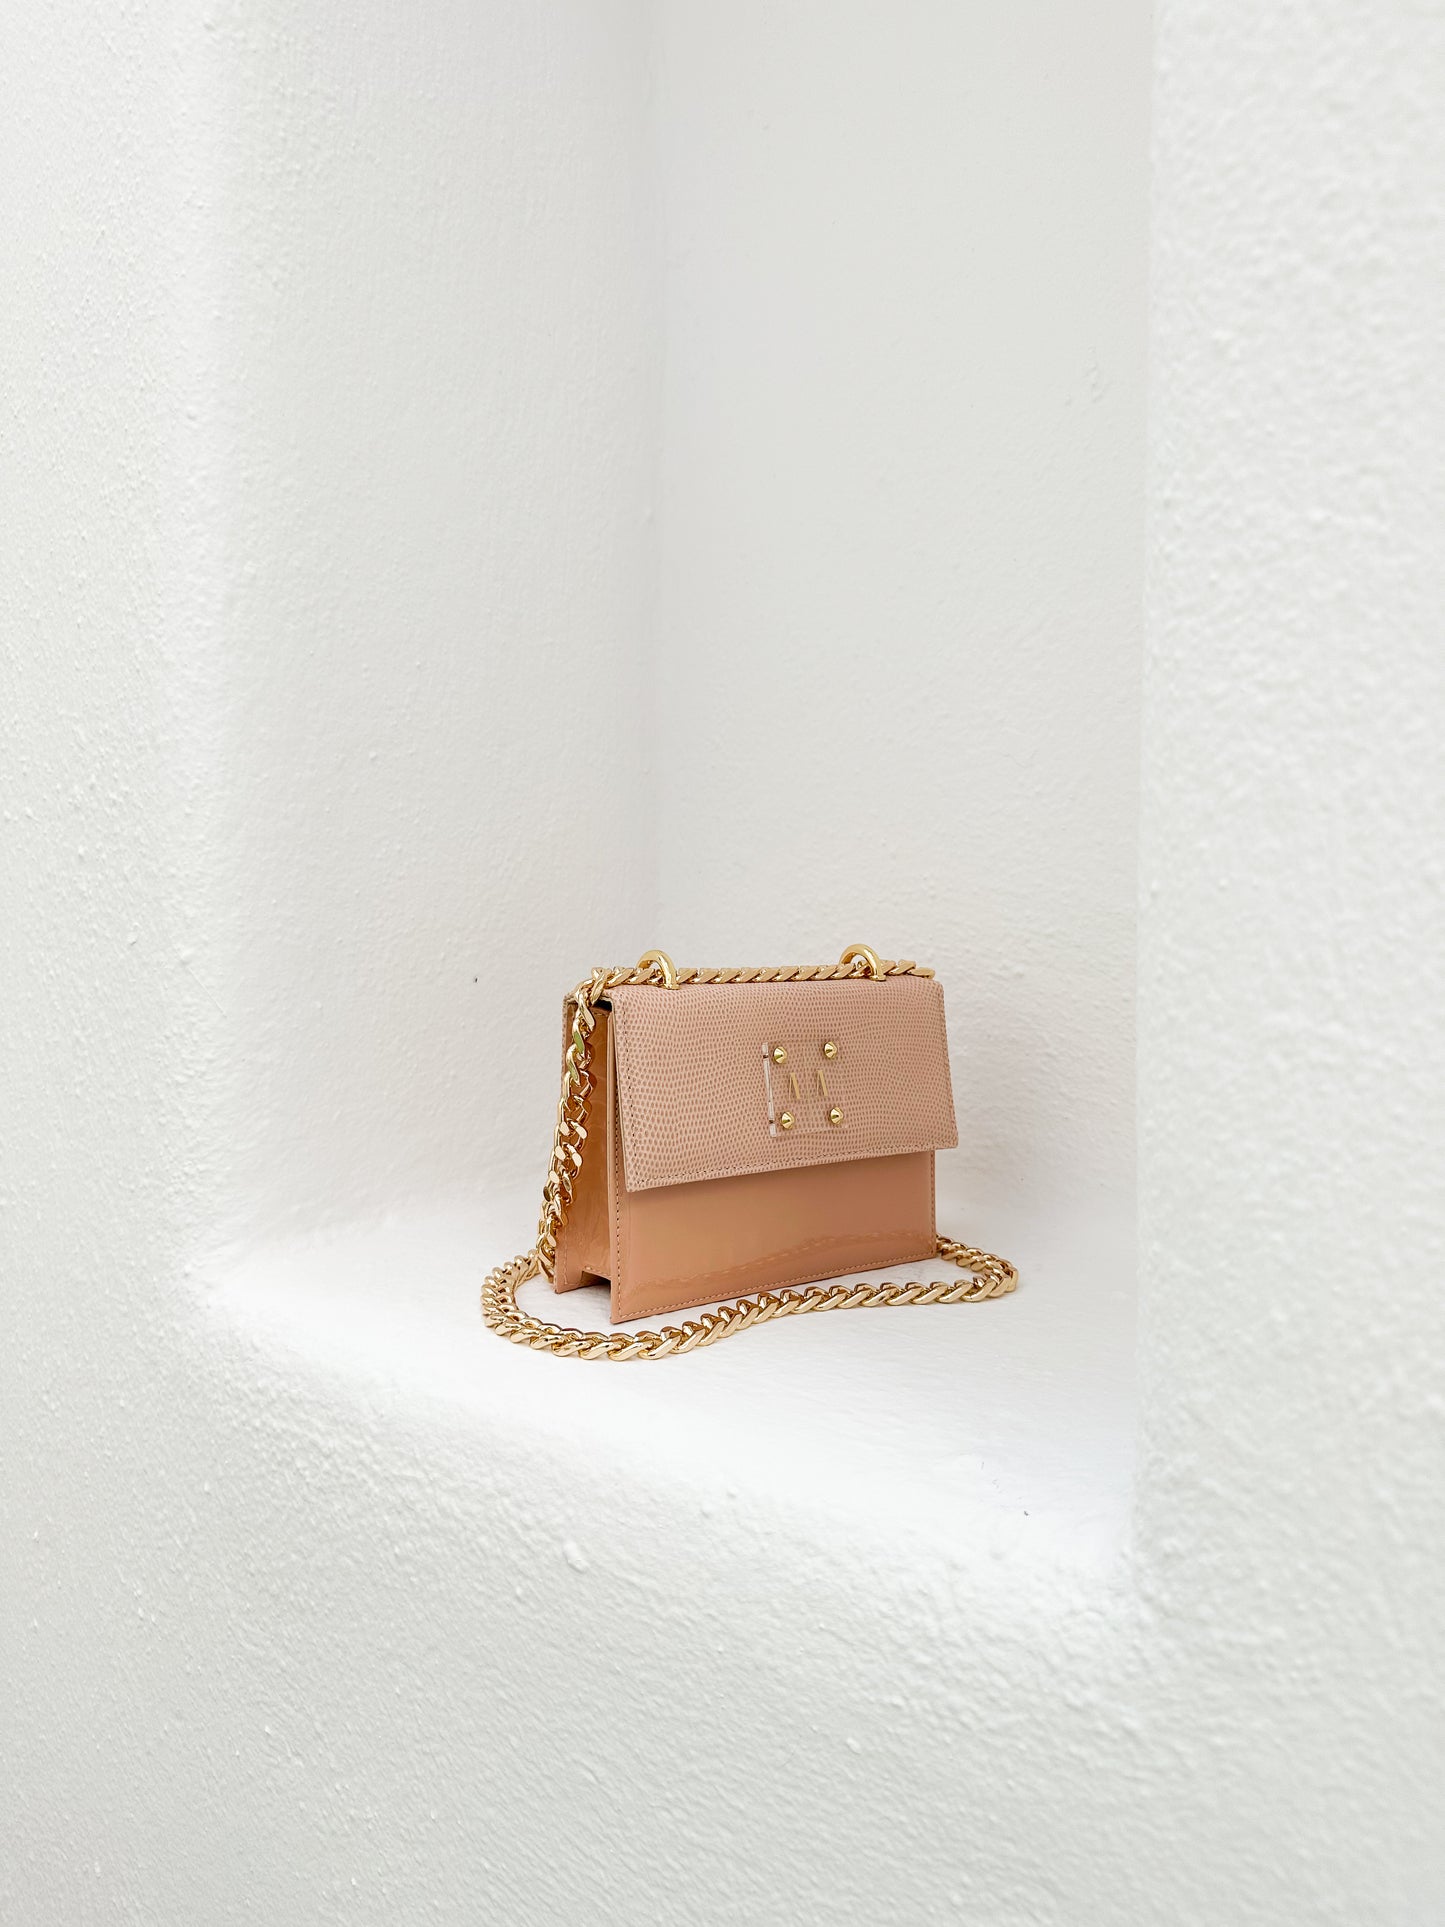 JUNE BAG  |  NUDE EMBOSSED & PATENT LEATHER